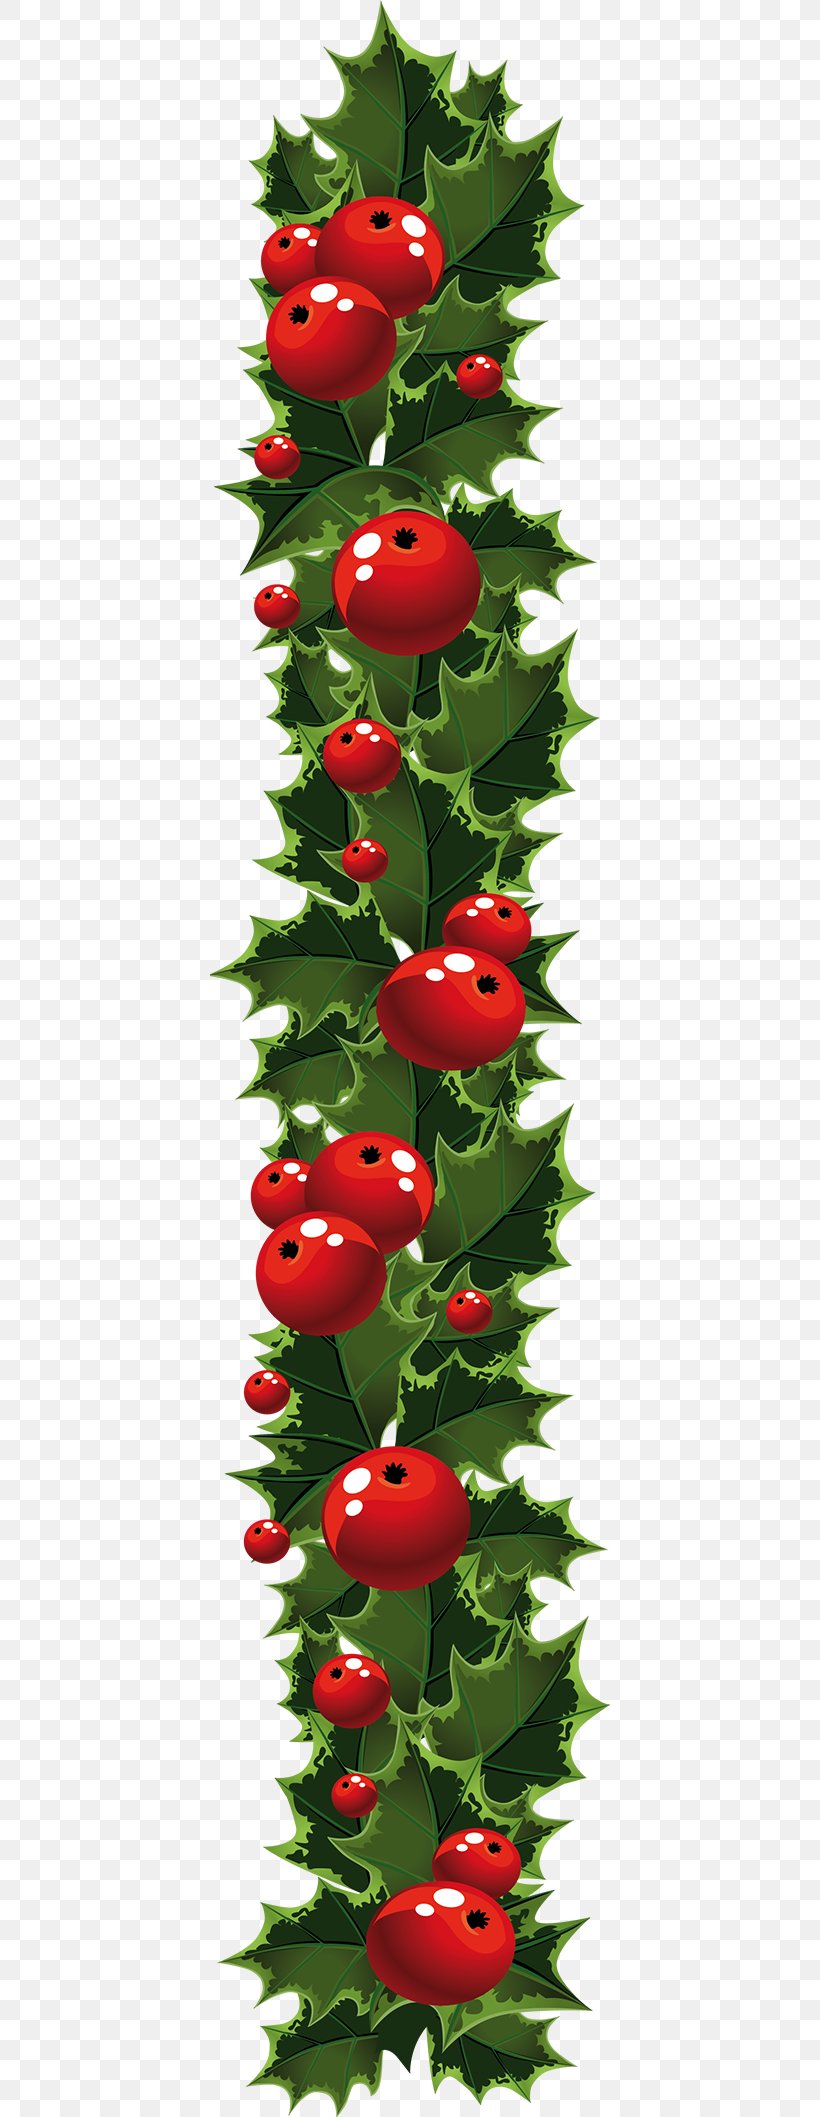 Garland Christmas Wreath Clip Art, PNG, 400x2117px, Garland, Christmas, Flower, Flowering Plant, Graphic Arts Download Free